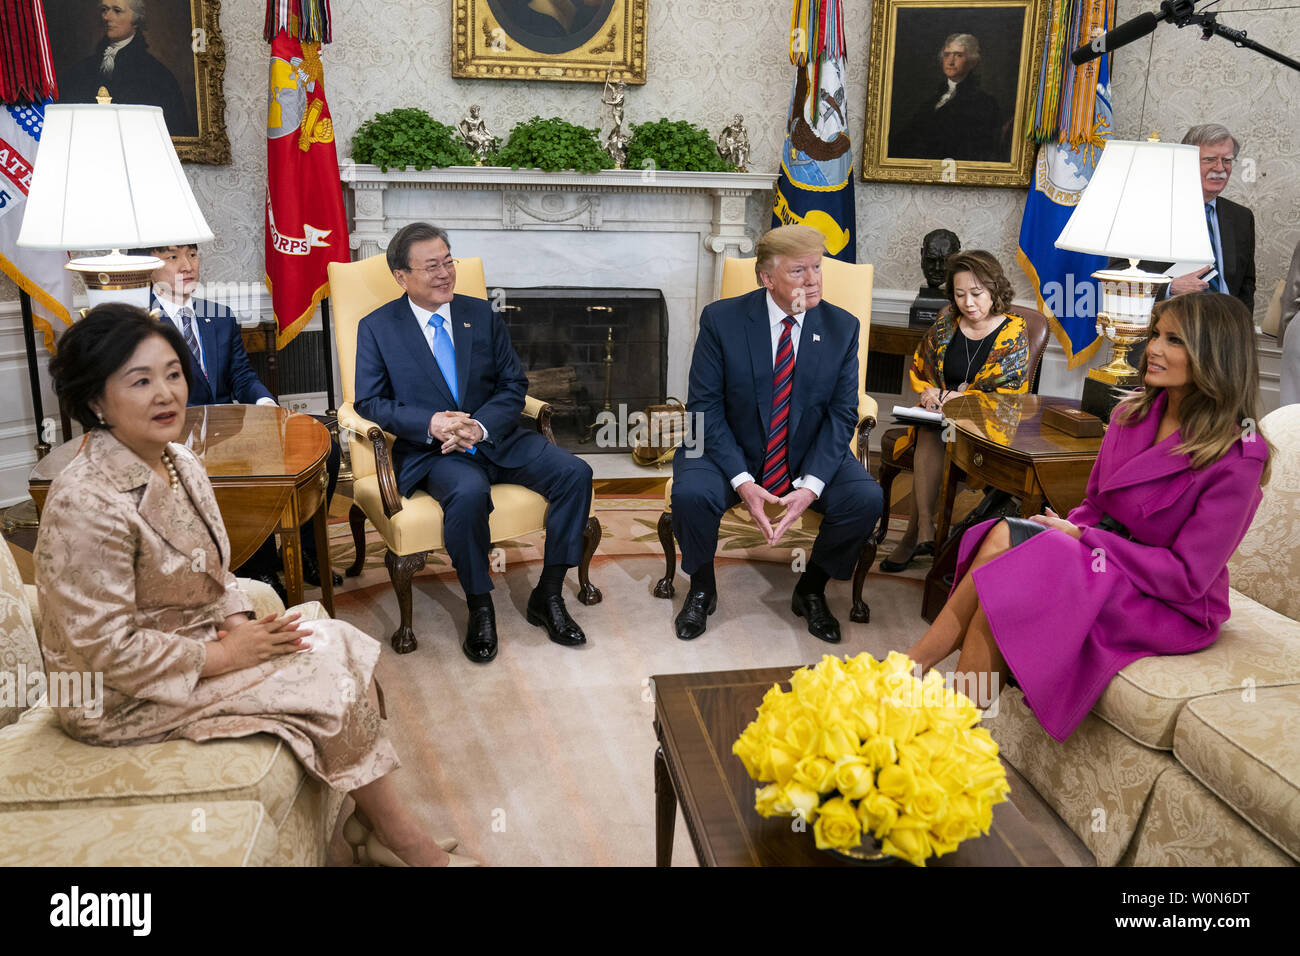 US President Donald J. Trump (C-R) welcomes South Korean President Moon Jae-in (C-L) to the Oval Office of the White House while Mrs. Kim Jung-sook (L) and US First Lady Melania Trump (R) look on in Washington on April 11, 2019. President Moon is expected to ask President Trump to reduce sanctions on North Korea in an attempt to jump start nuclear negotiations between North Korea and the US.  Photo by Jim Lo Scalzo/UPI Stock Photo